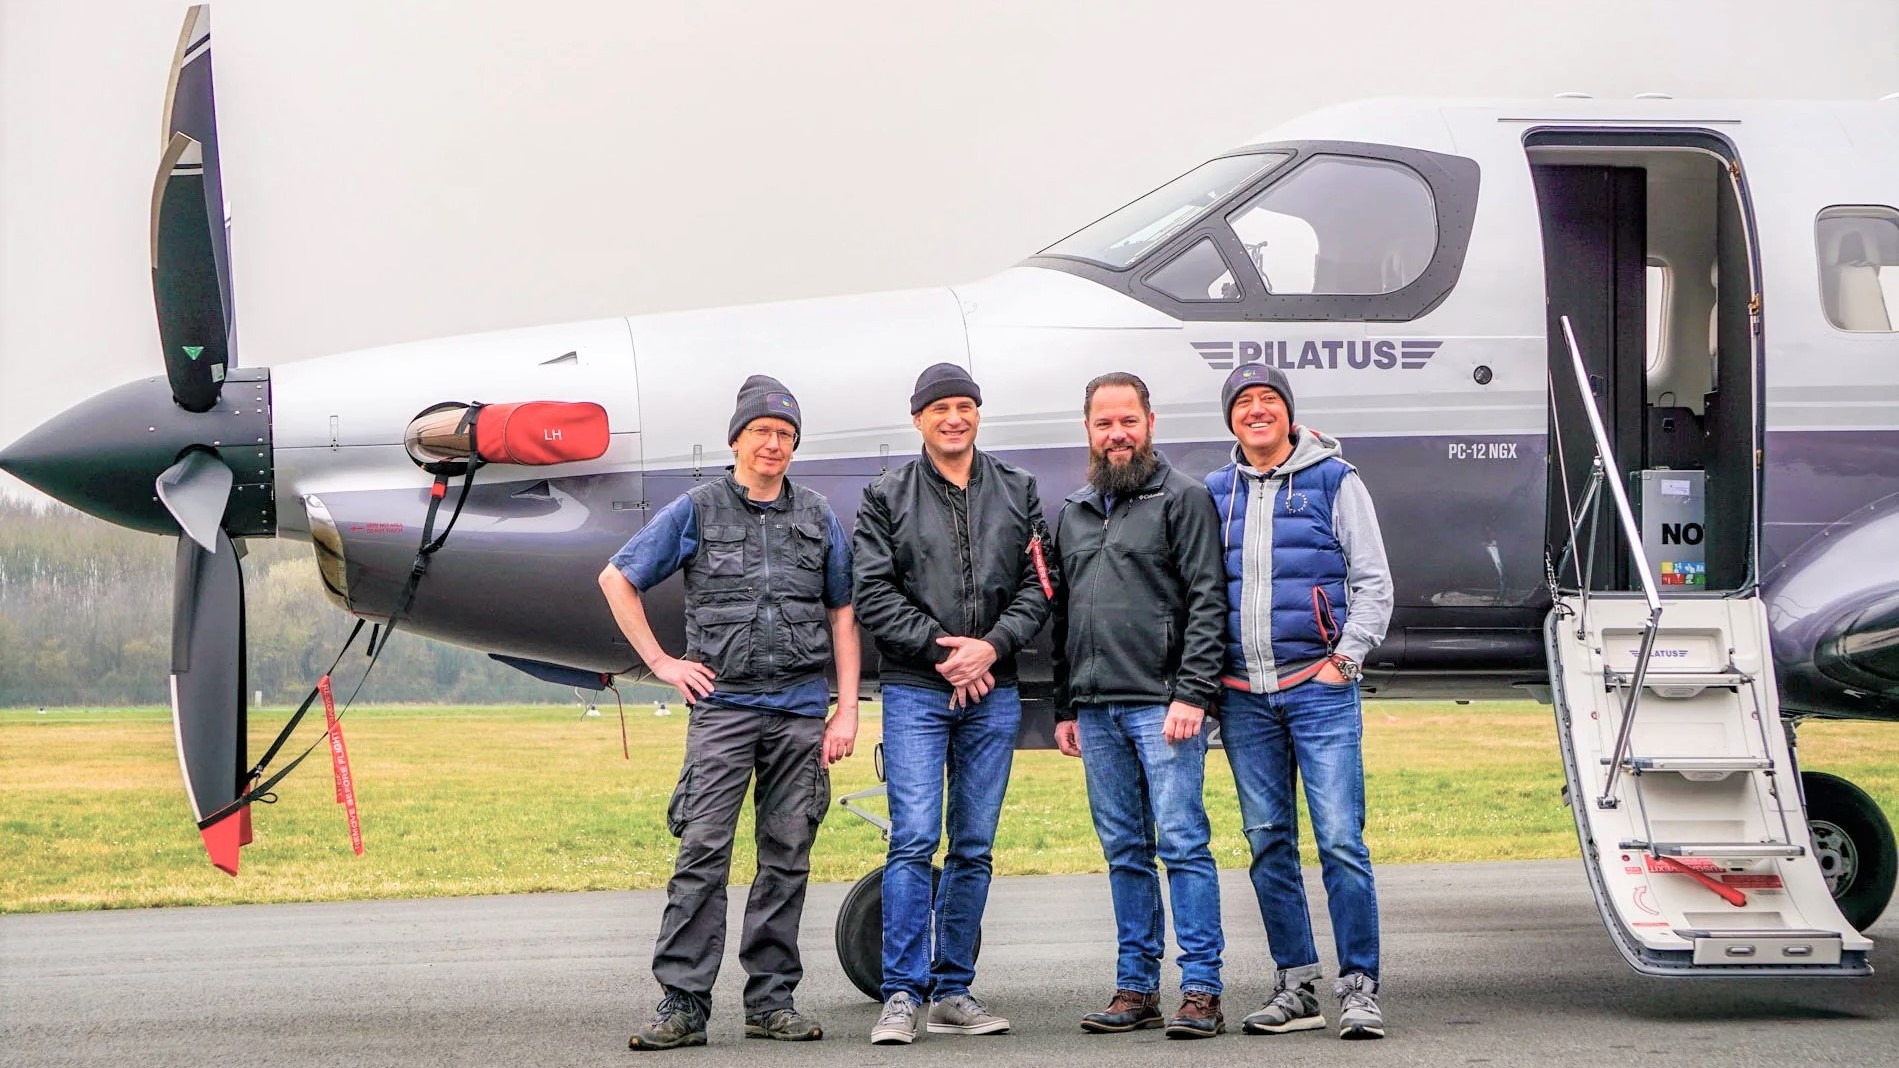 Travis Kelley (second from right) and his team are happy about a successful flight preparation.